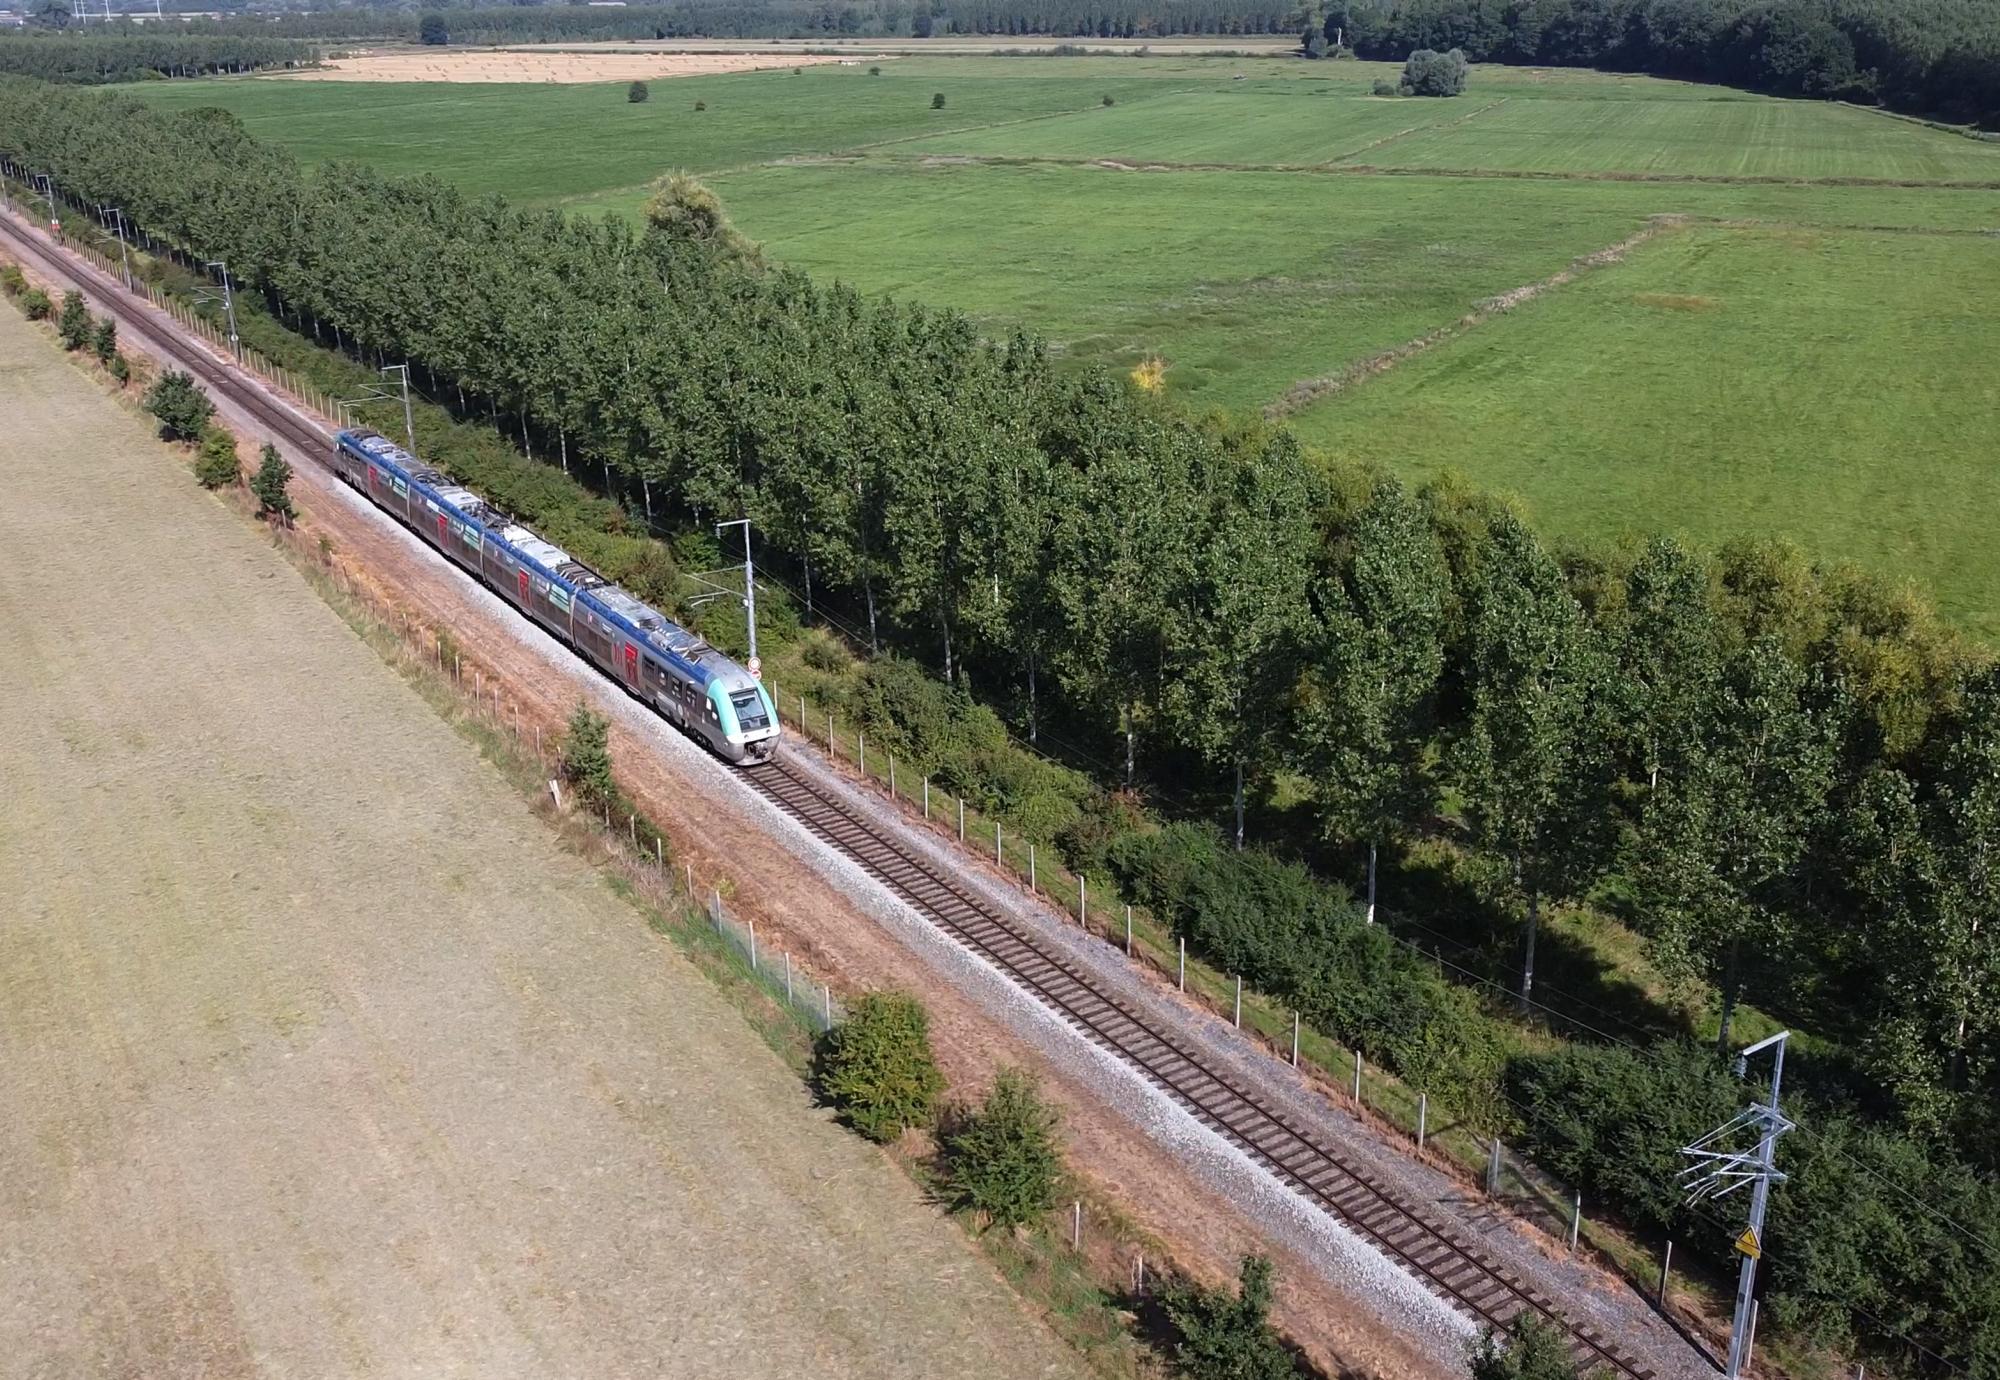 SNCF and Alstom unveil first battery-powered trains for five regions in France